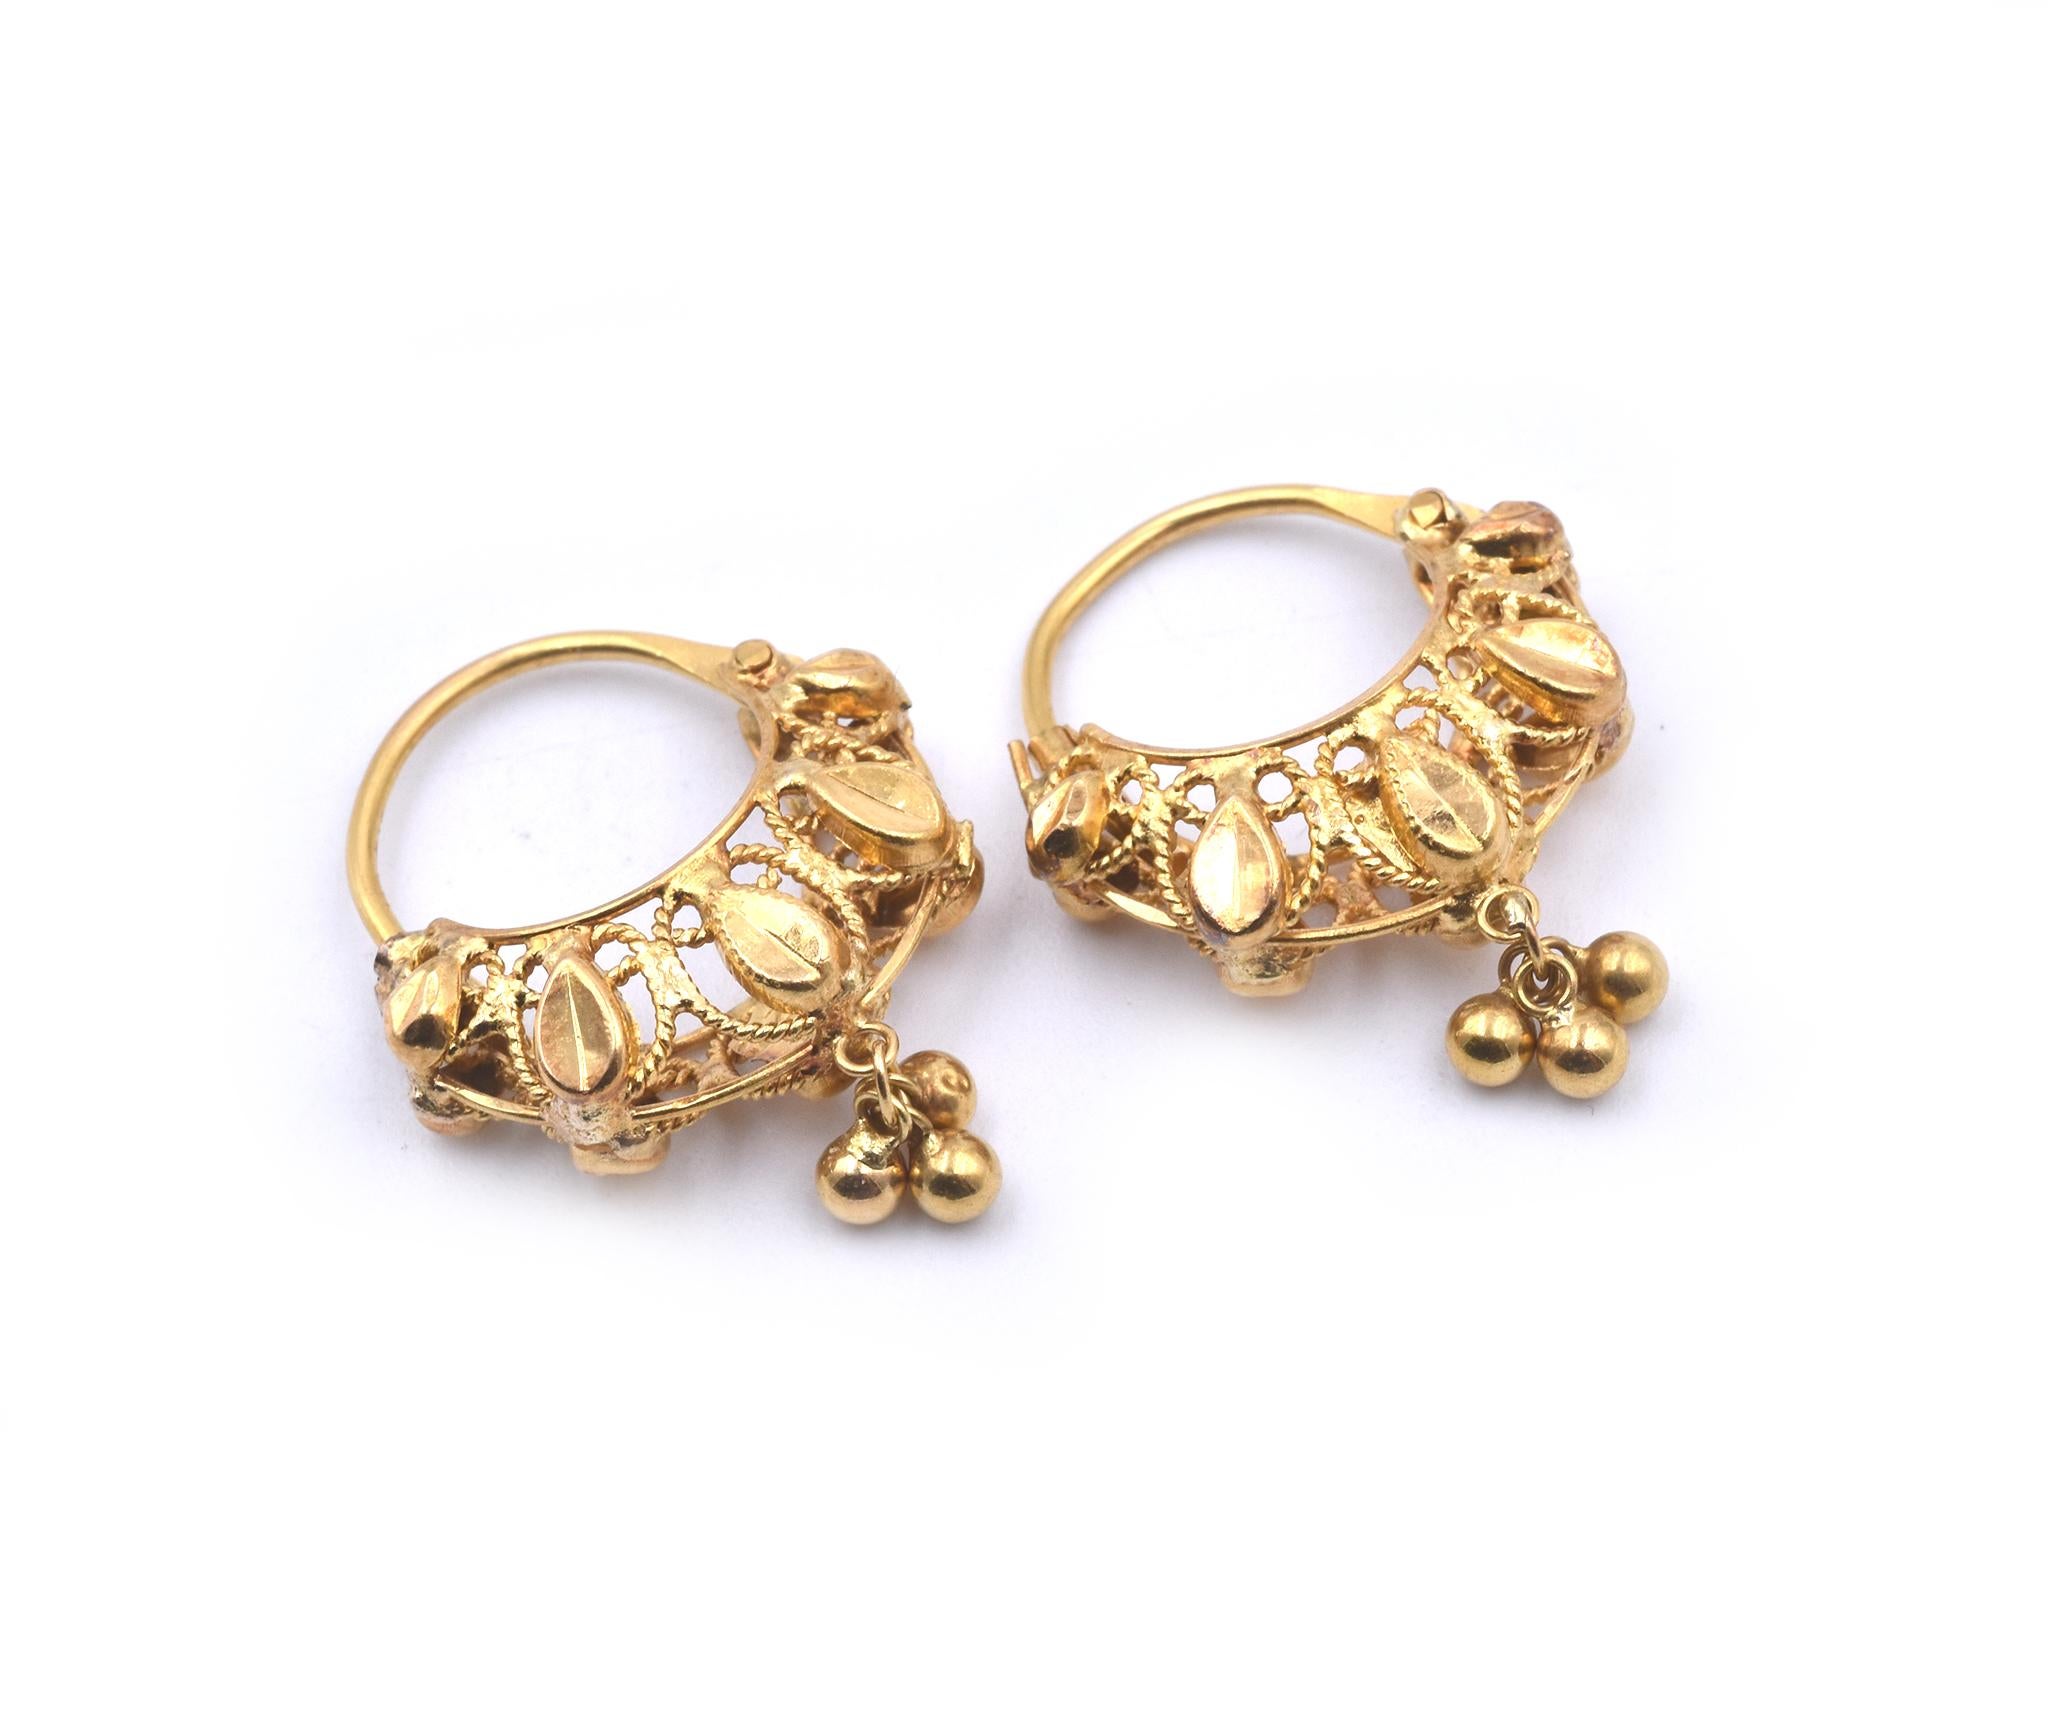 Designer: custom 
Material: 18k yellow gold
Dimensions: the earrings measure 1 inch in length & ¾ of an inch in width
Weight:  4.97 grams